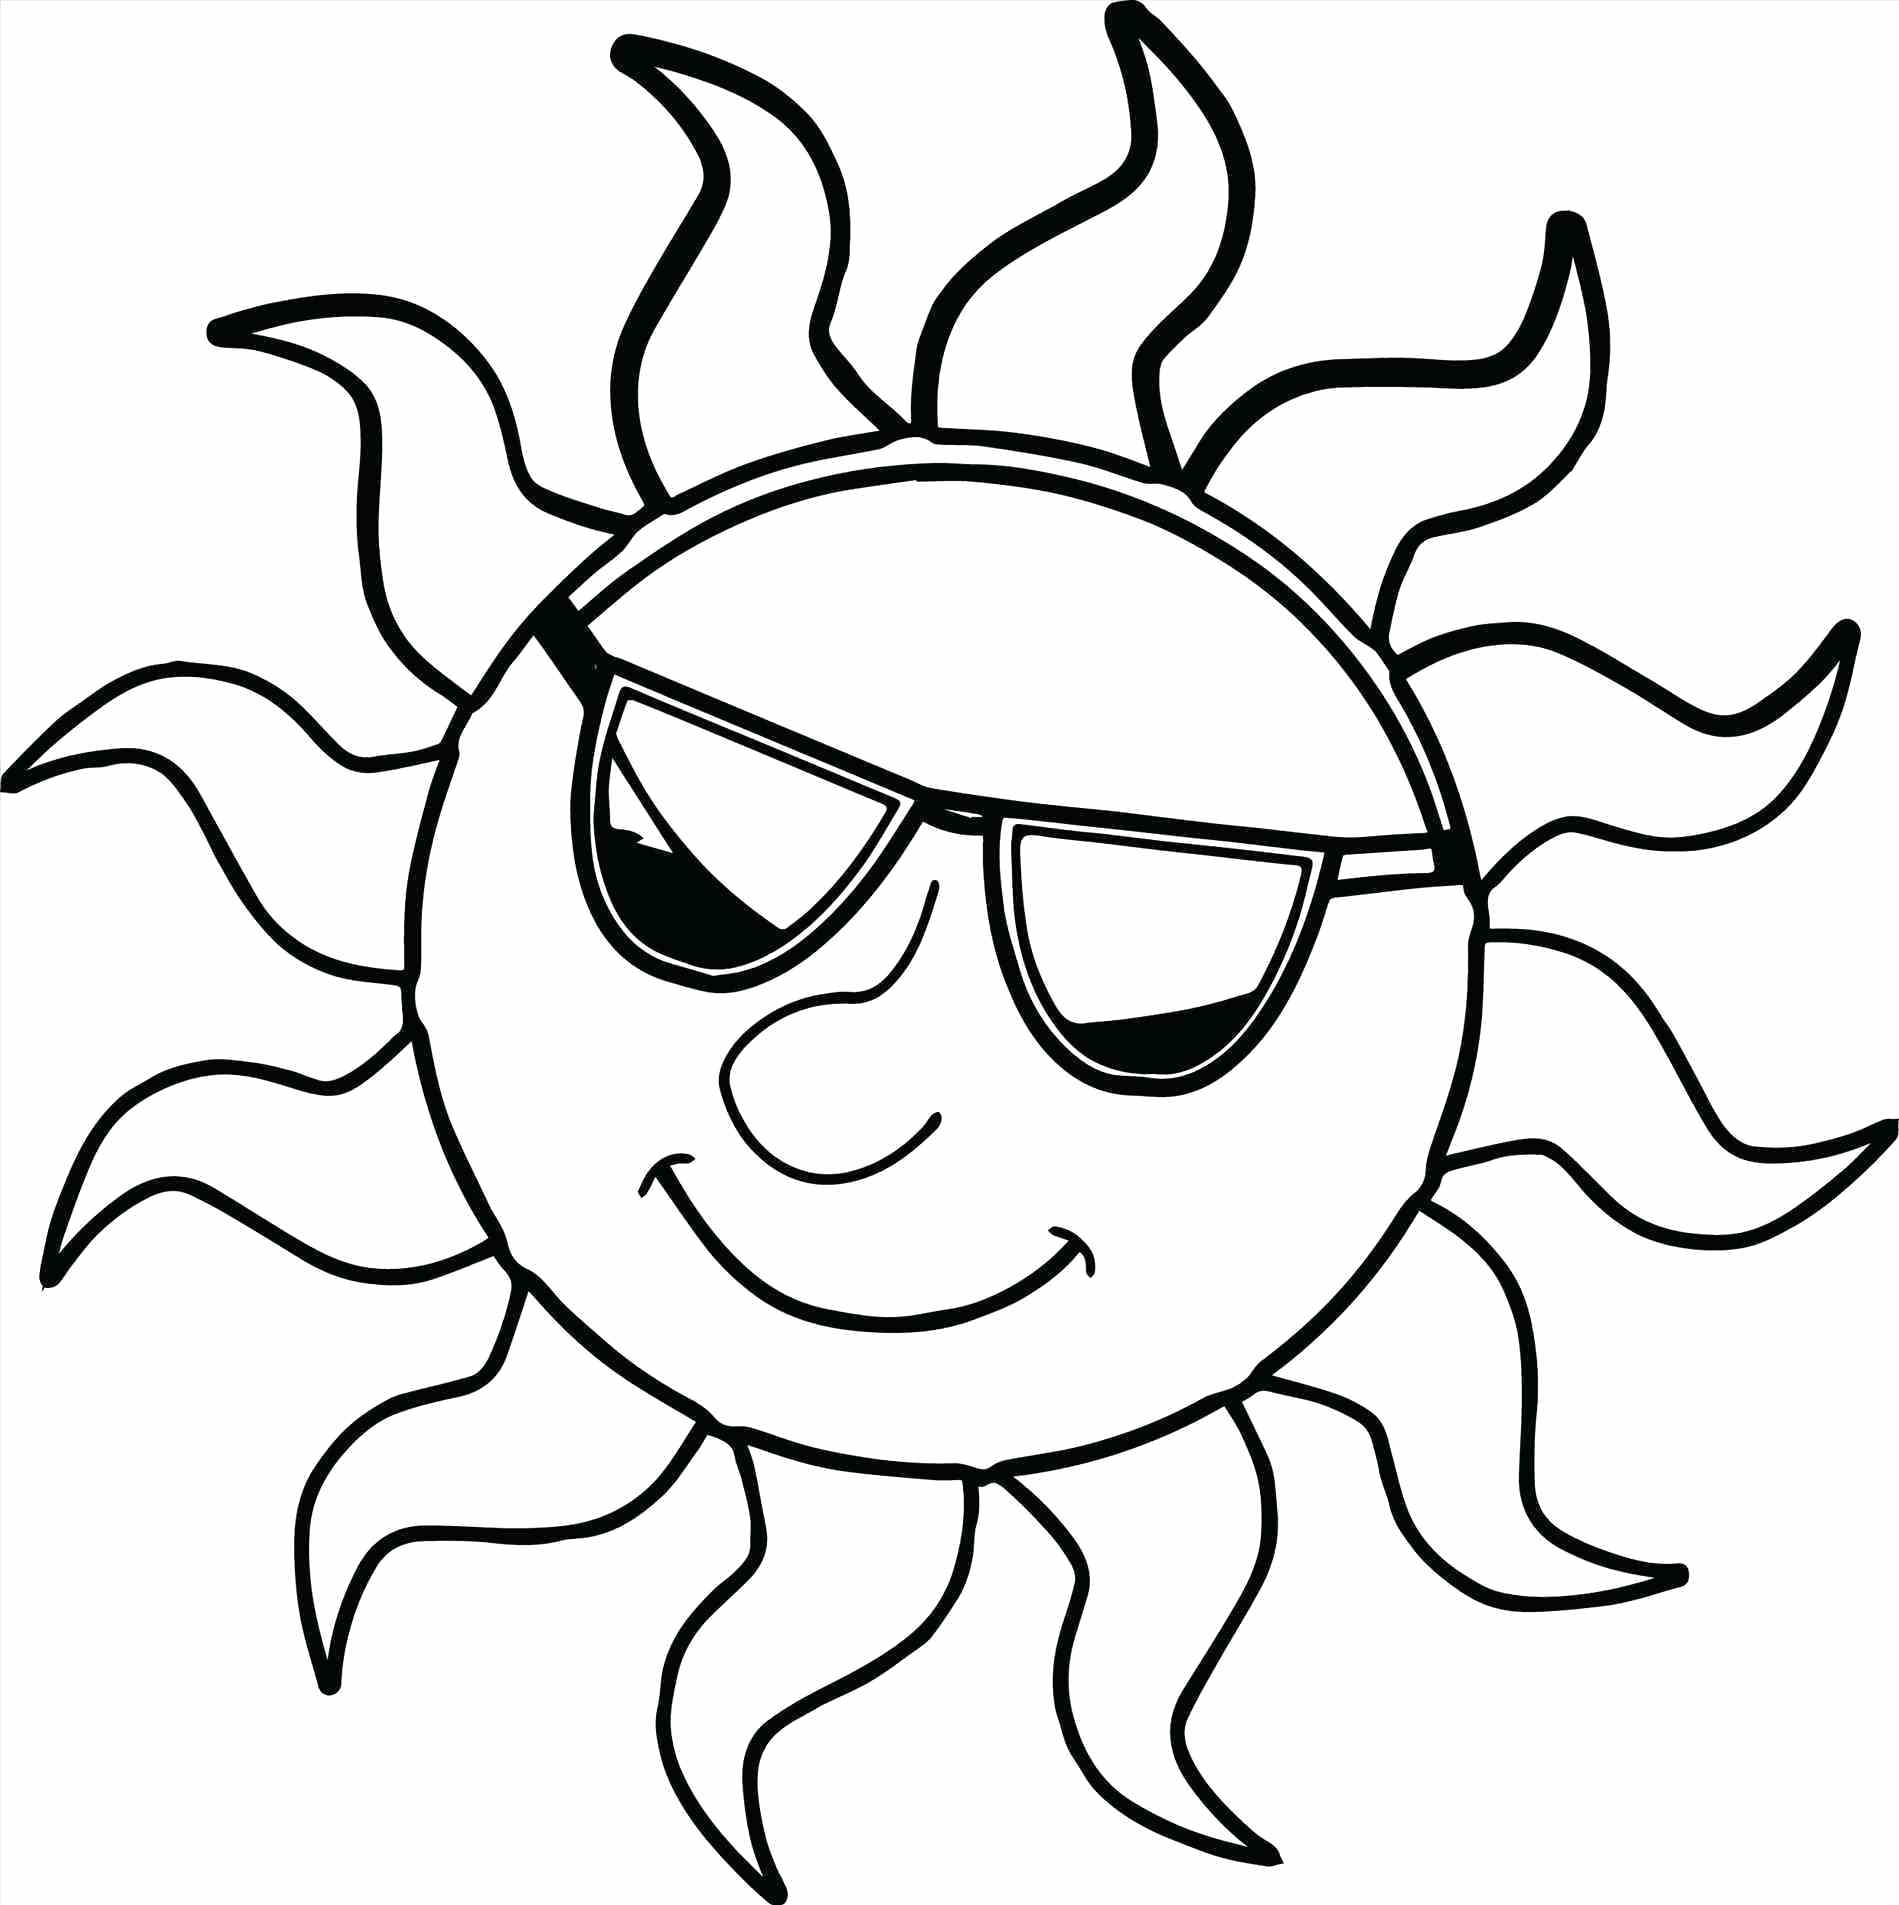 Coloring Pages : Sun Coloring Page Pages Marvelous Image ...